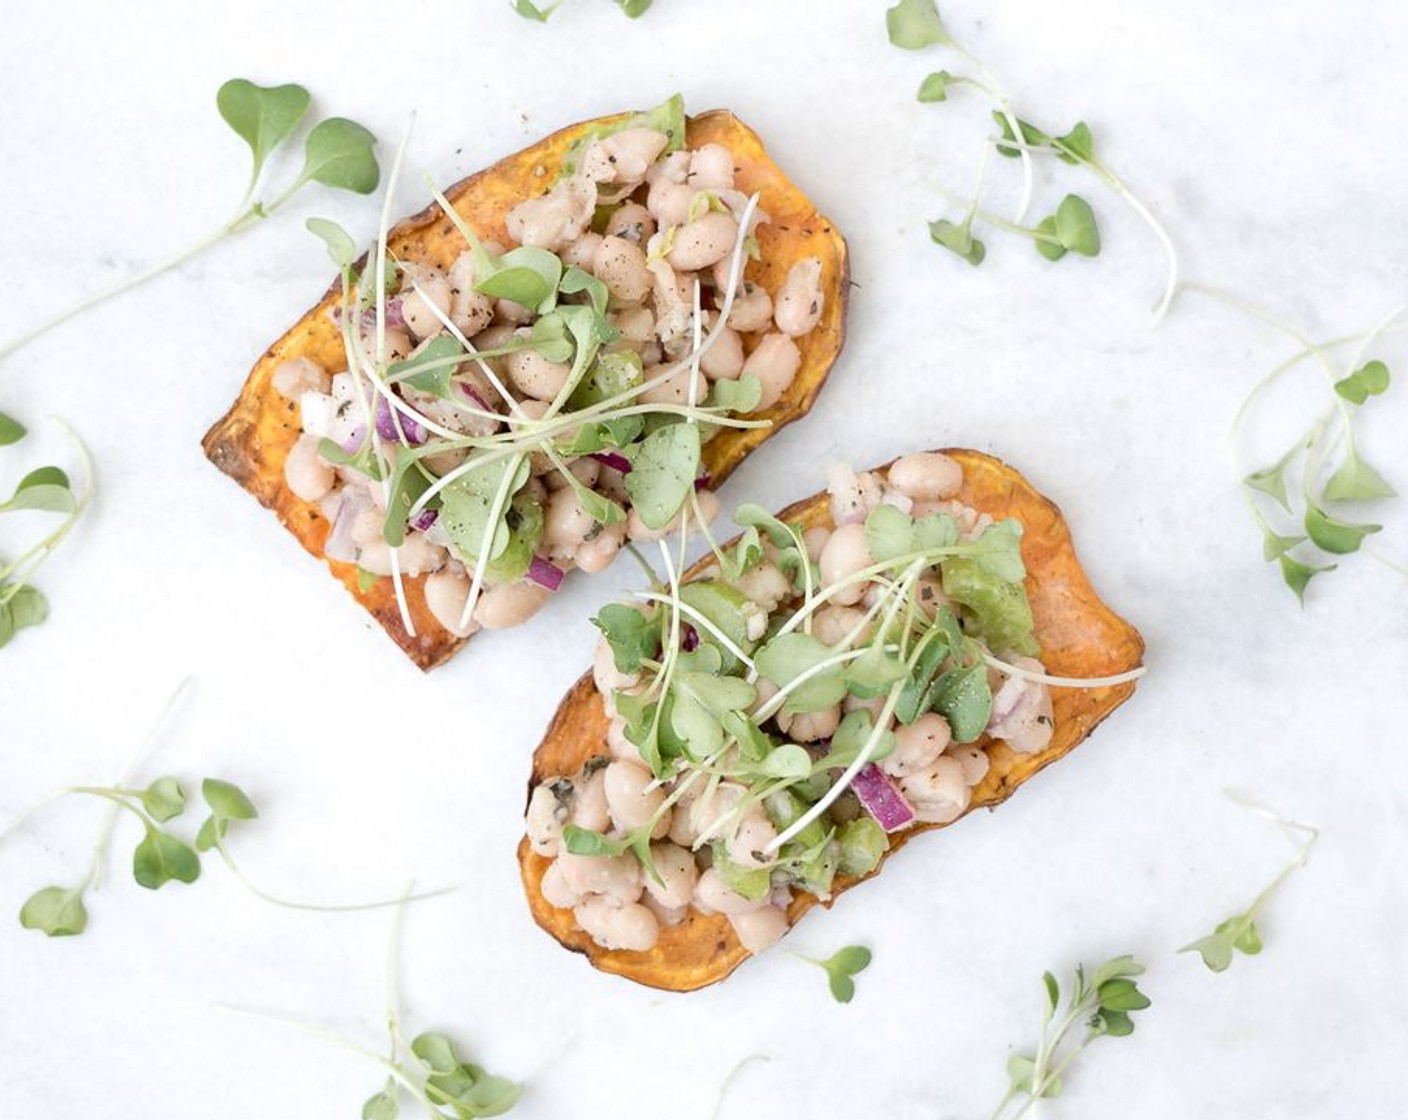 step 6 Spoon over top of sweet potato toastie. This recipe will make more than enough that you can enjoy the rest as a salad, or make more toasties!